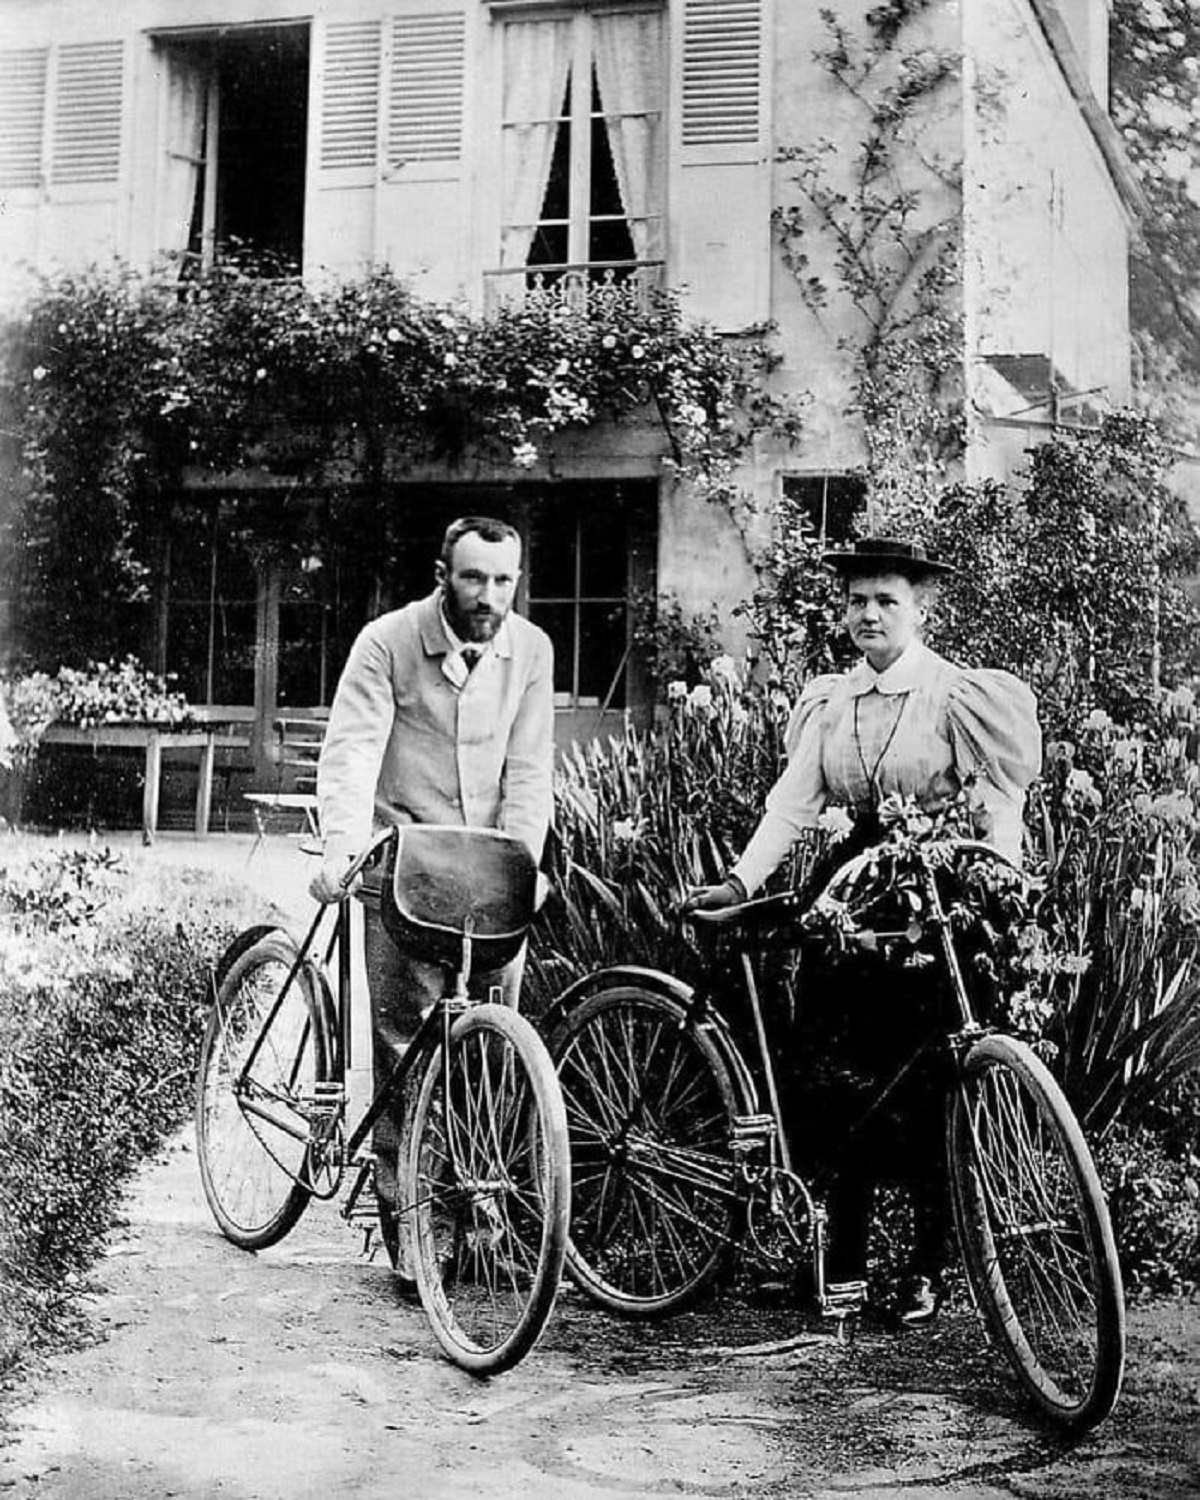 Physicists And Nobel Prize Winners Marie Curie And Pierre Curie Shortly After Their Wedding. France (1895)